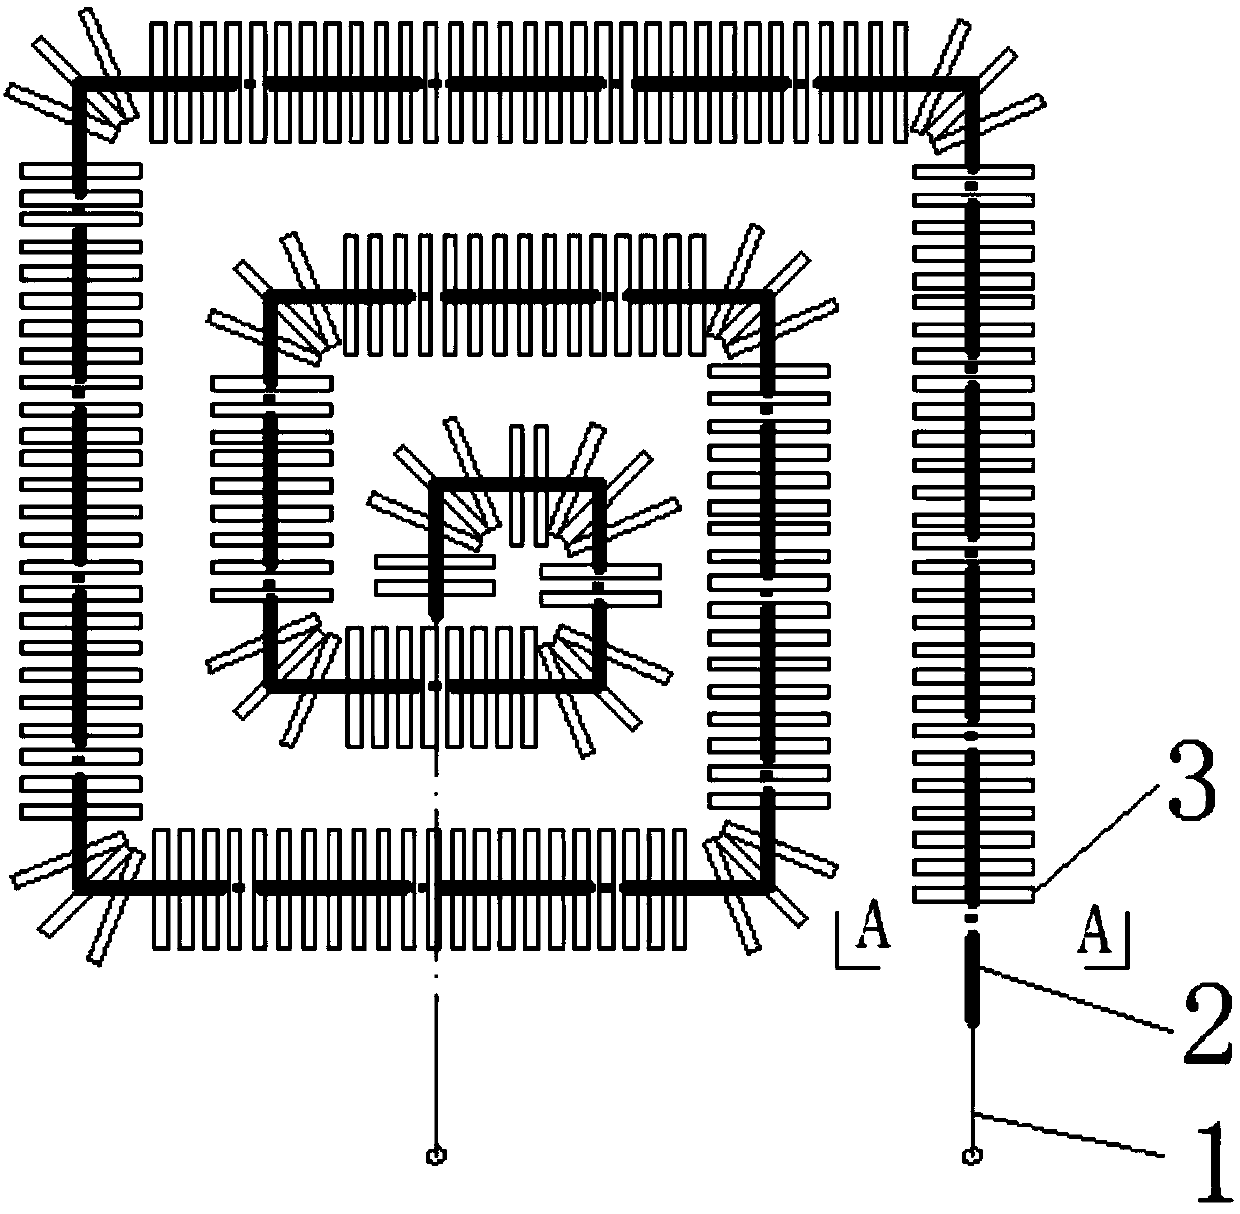 Electrical heating assembly for electromagnetic induction heating